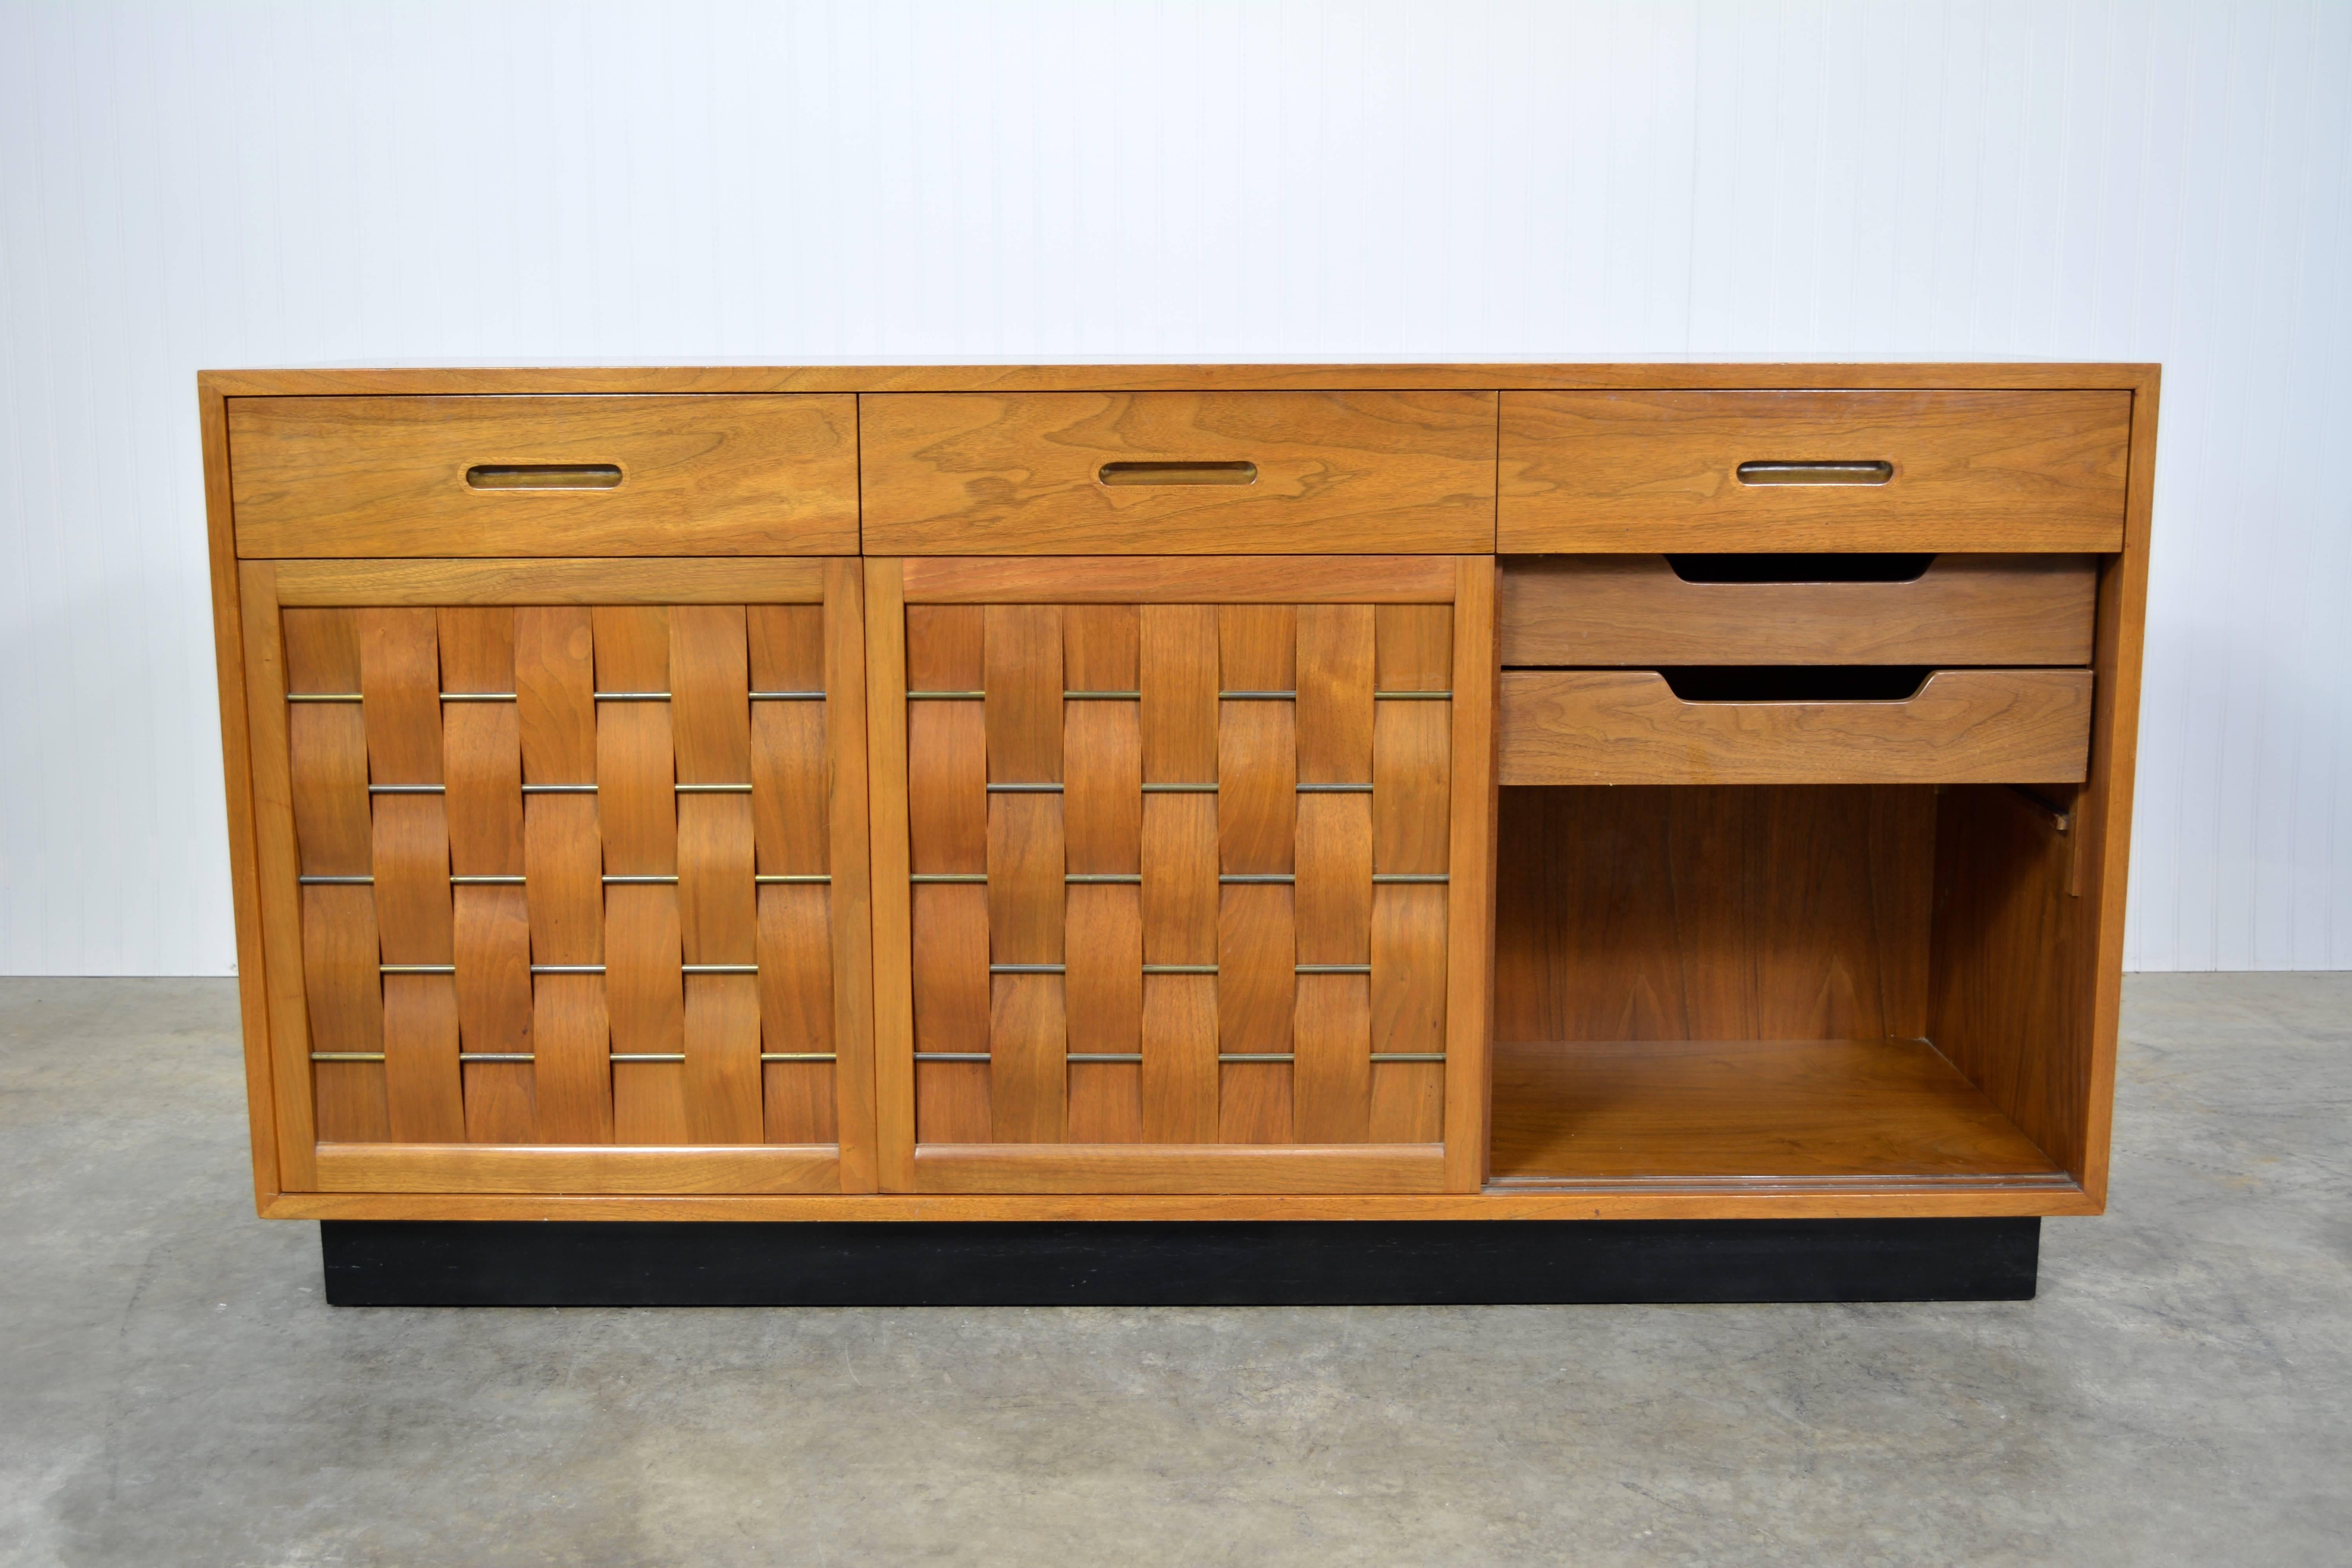 Beautiful mahogany credenza designed by Edward Wormley for Dunbar. Features three woven front sliding doors that reveal ample storage. Above those are three sliding drawers. Original finish.